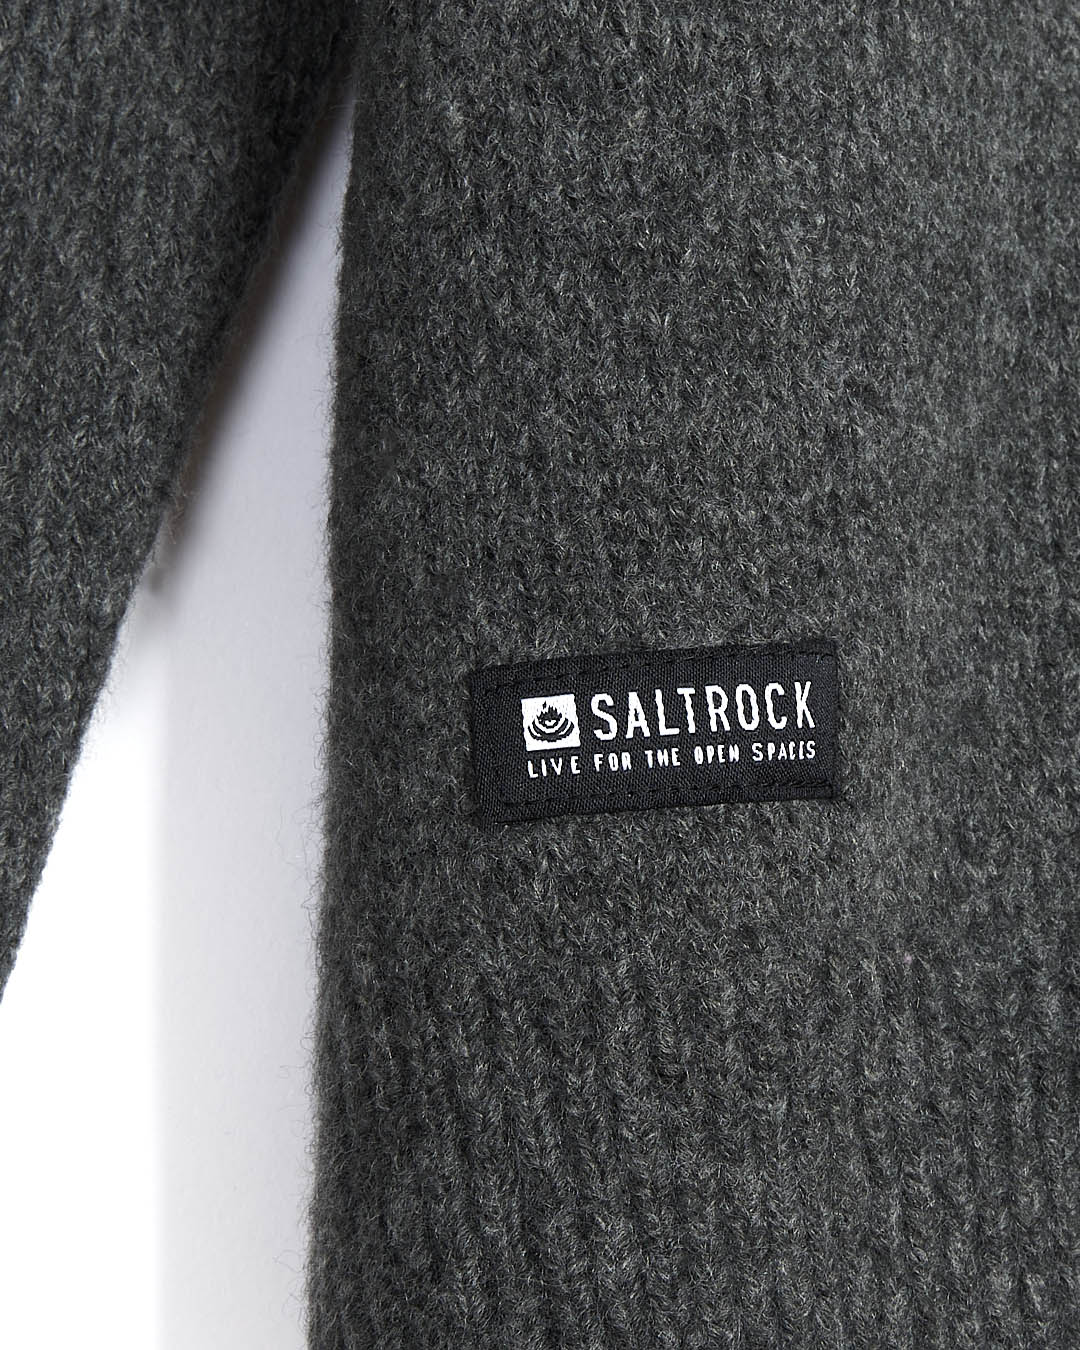 A close up of the Saltrock branding logo on a Bowen - Mens Knitted Crew - Grey sweater, perfect for layering.